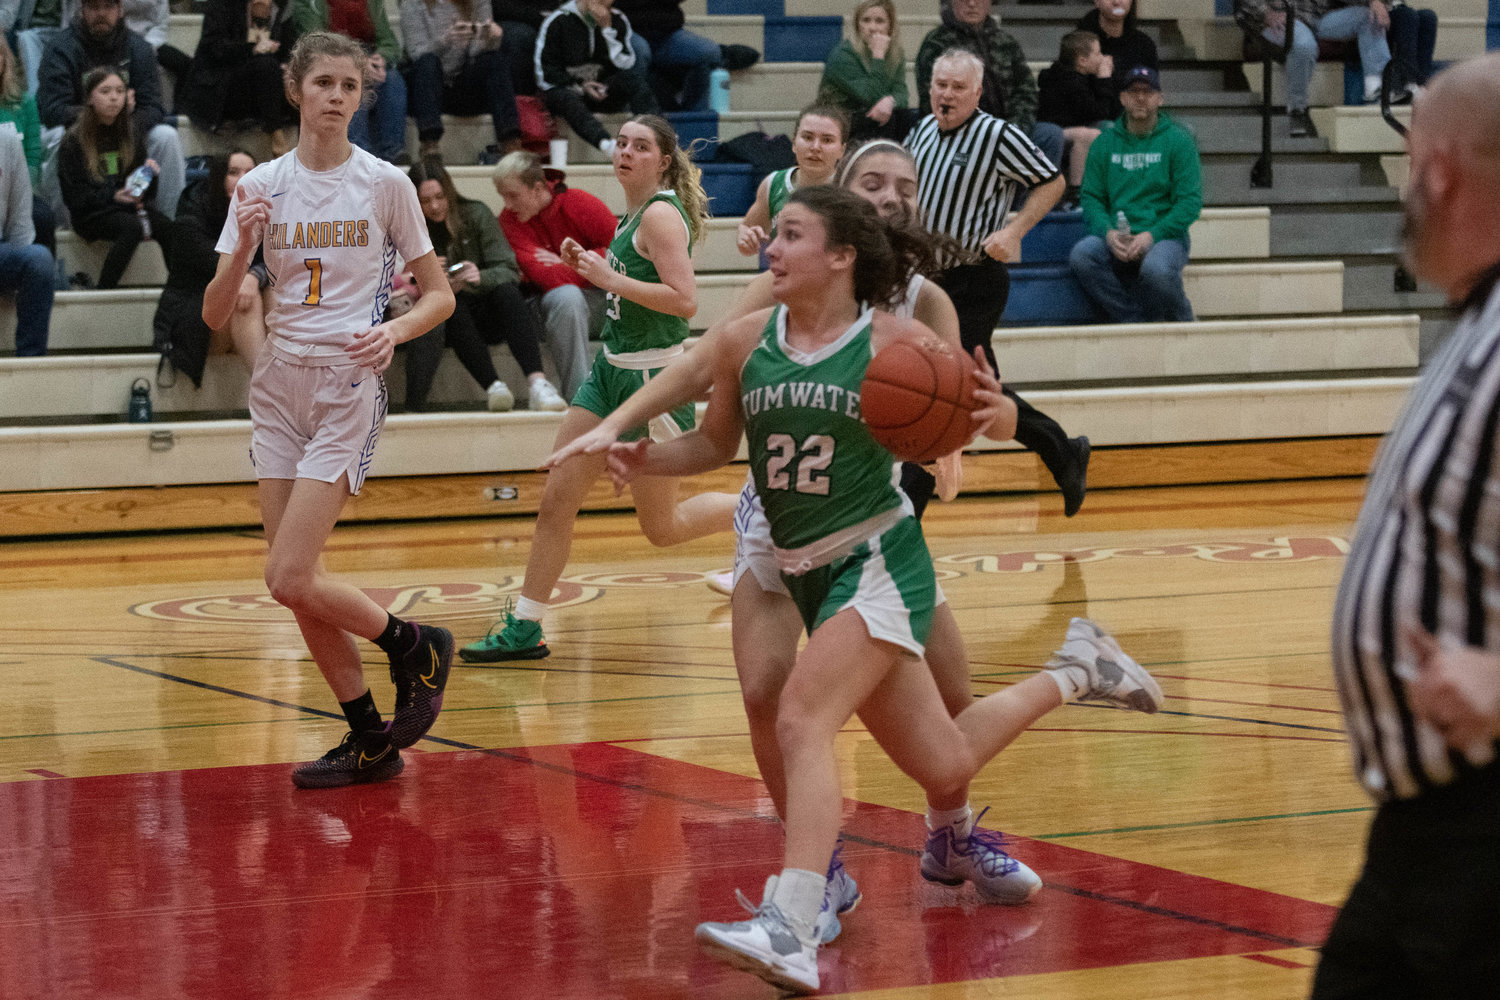 Regan Brewer drives to the basket during the second half of Tumwater's 39-25 win over Kelso on Jan. 16 at the LCC MLK Day Classic in Longview.